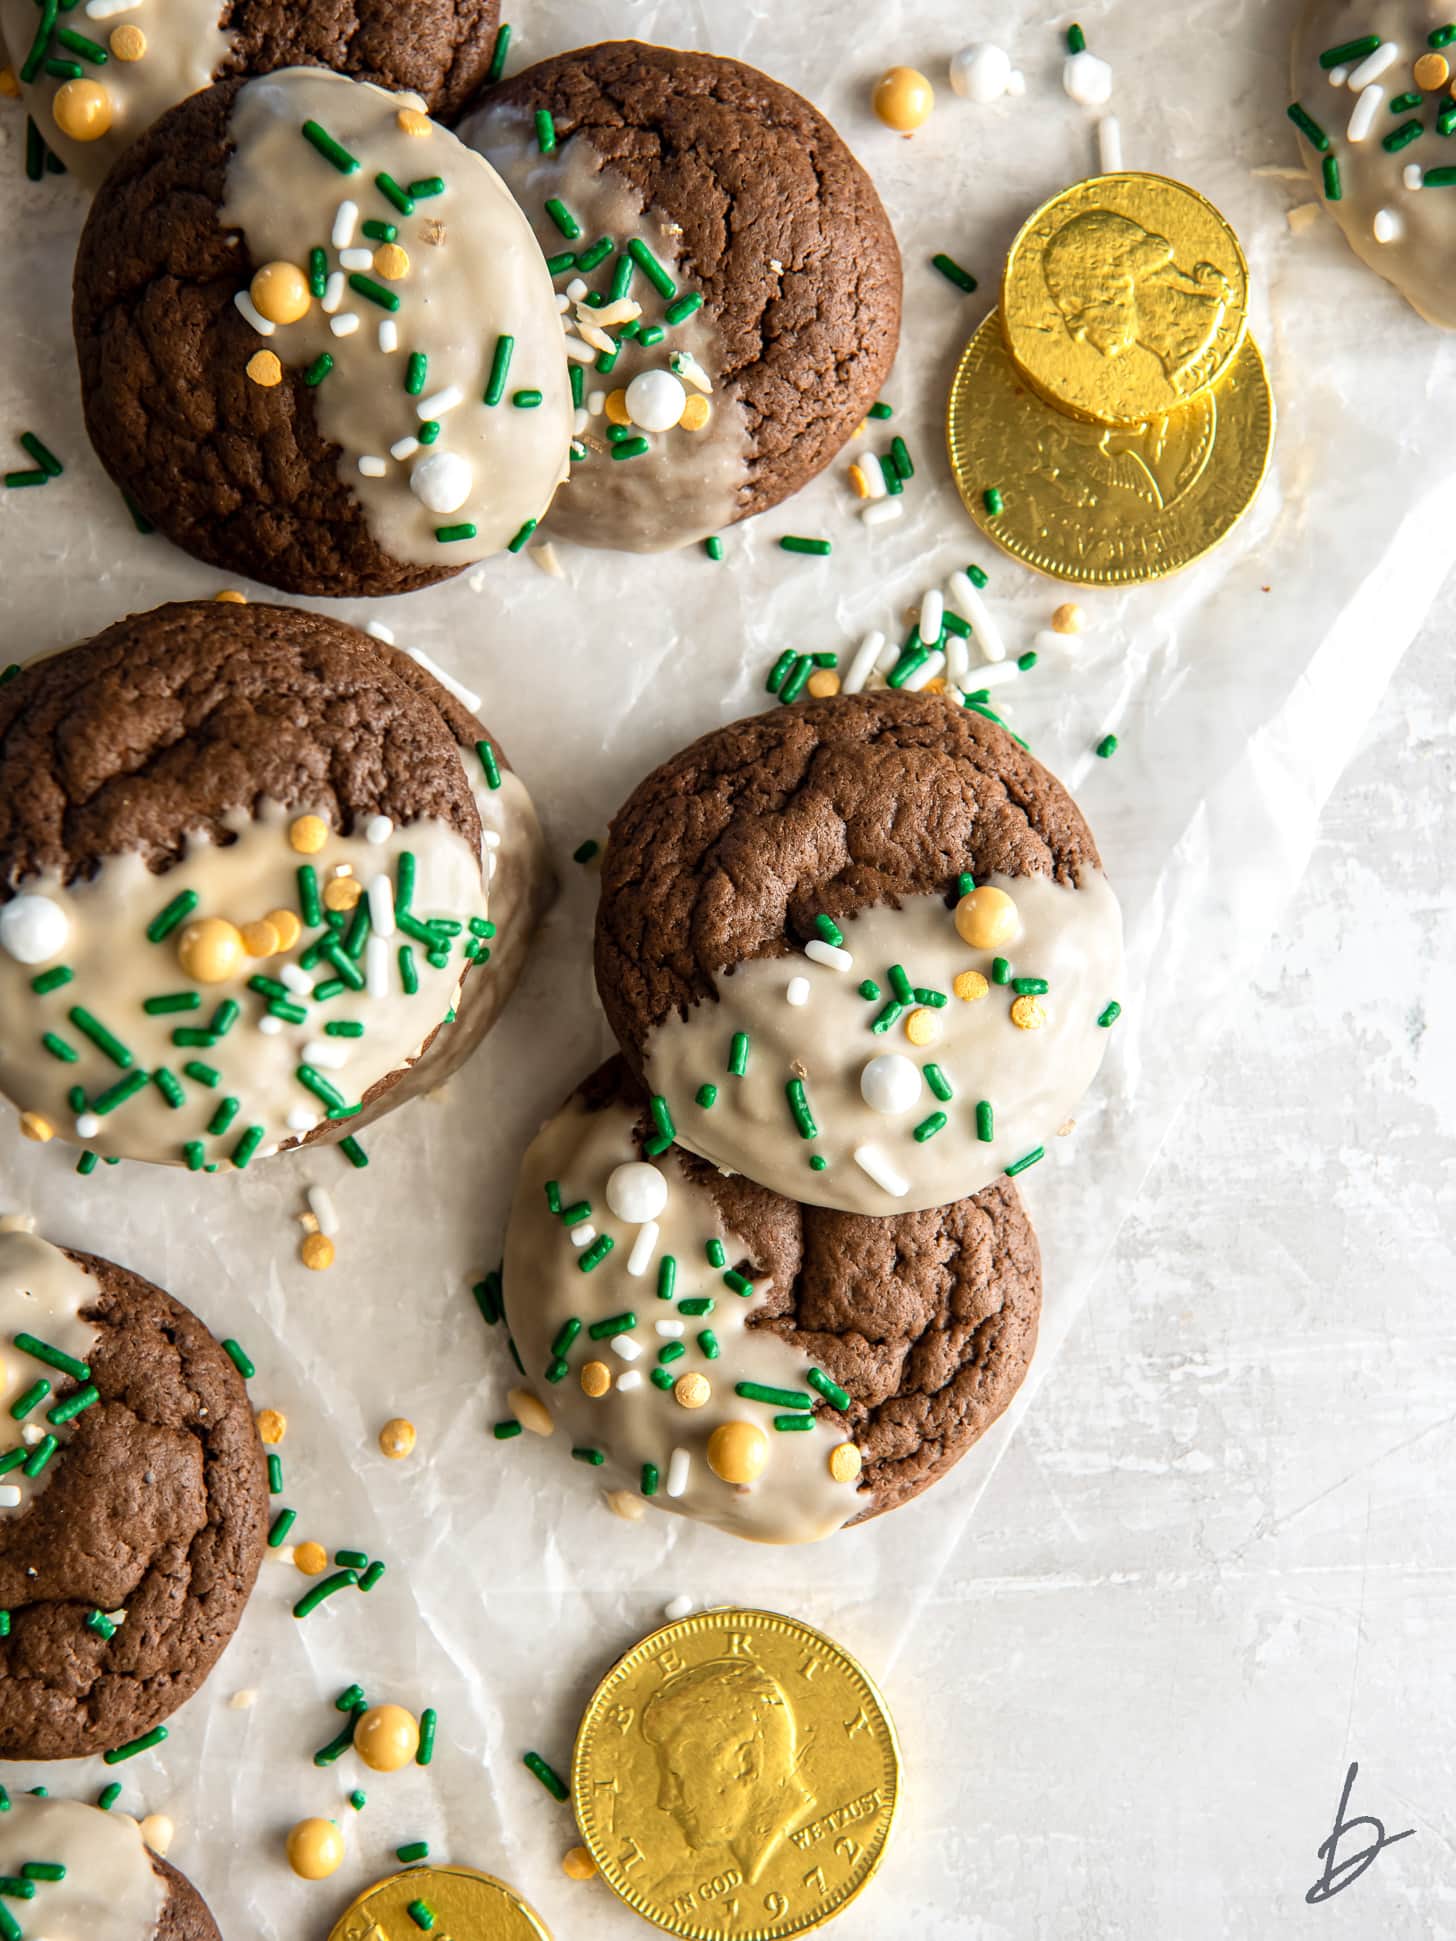 bailey's irish cream cookies with icing and sprinkles on parchment paper with some gold coins.